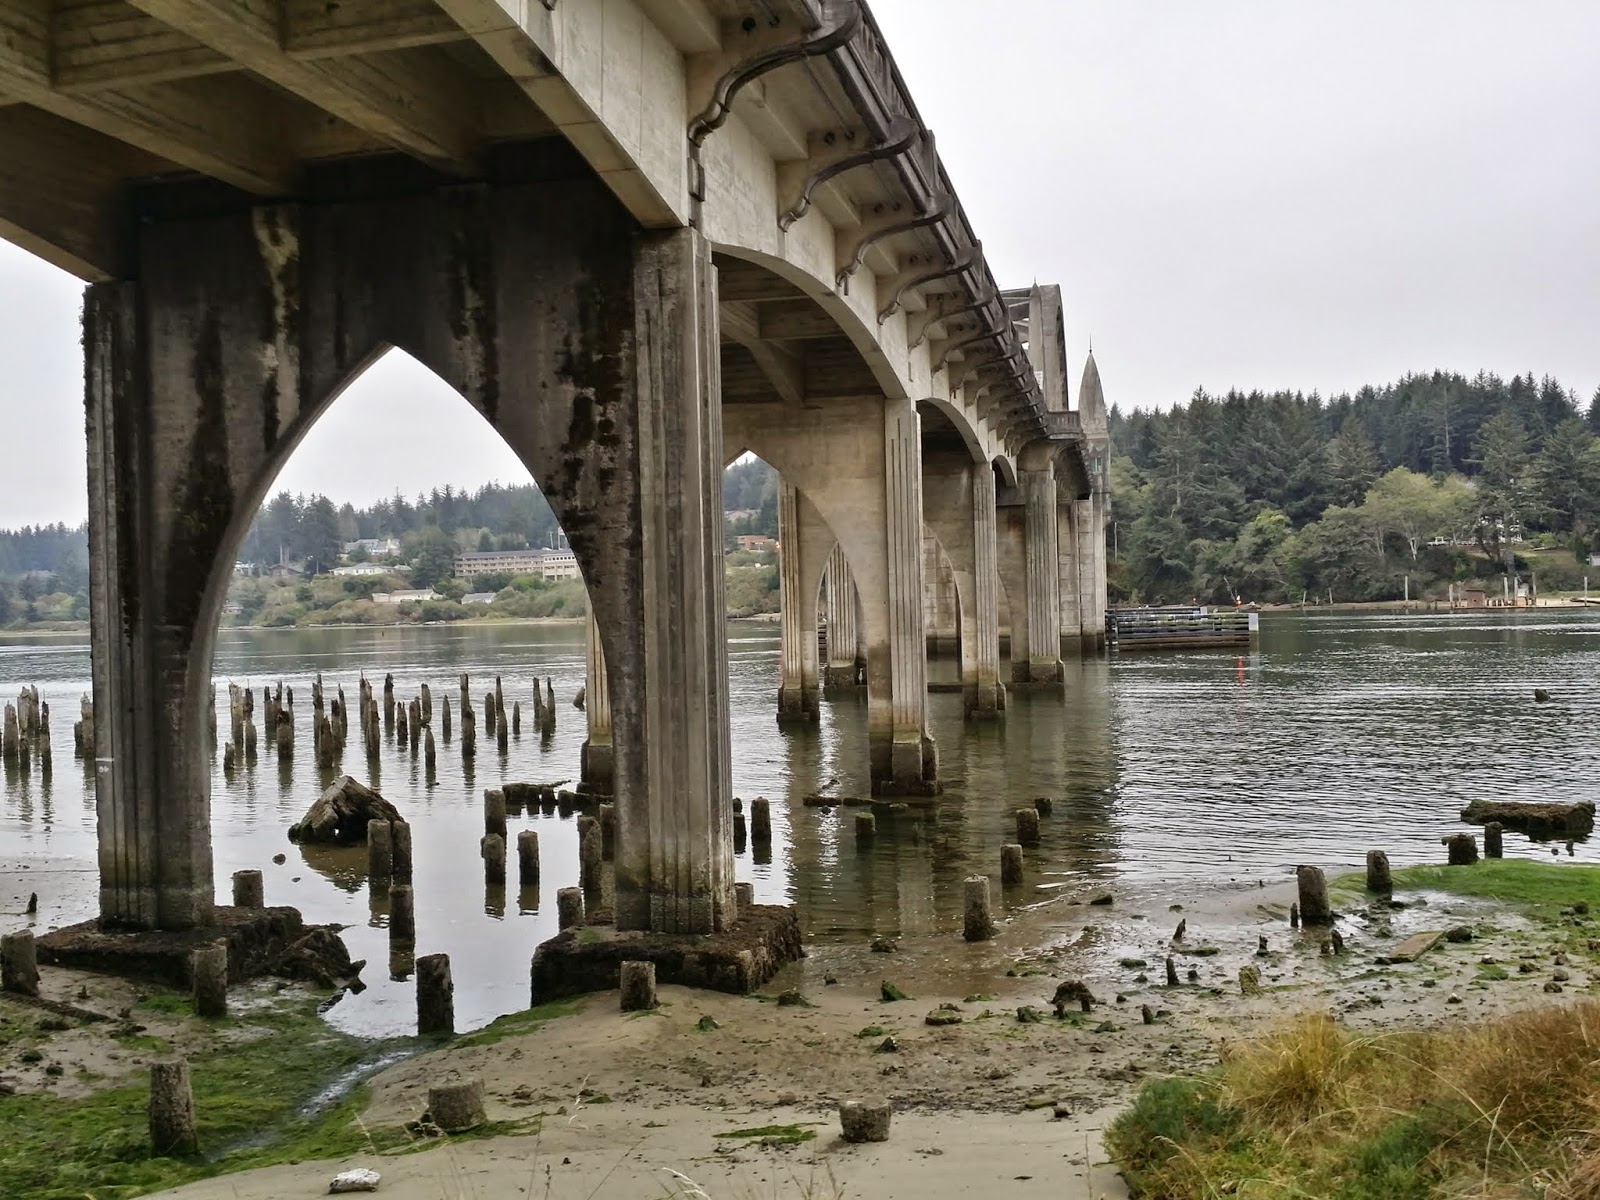 under the Siuslaw River Bridge in Florence